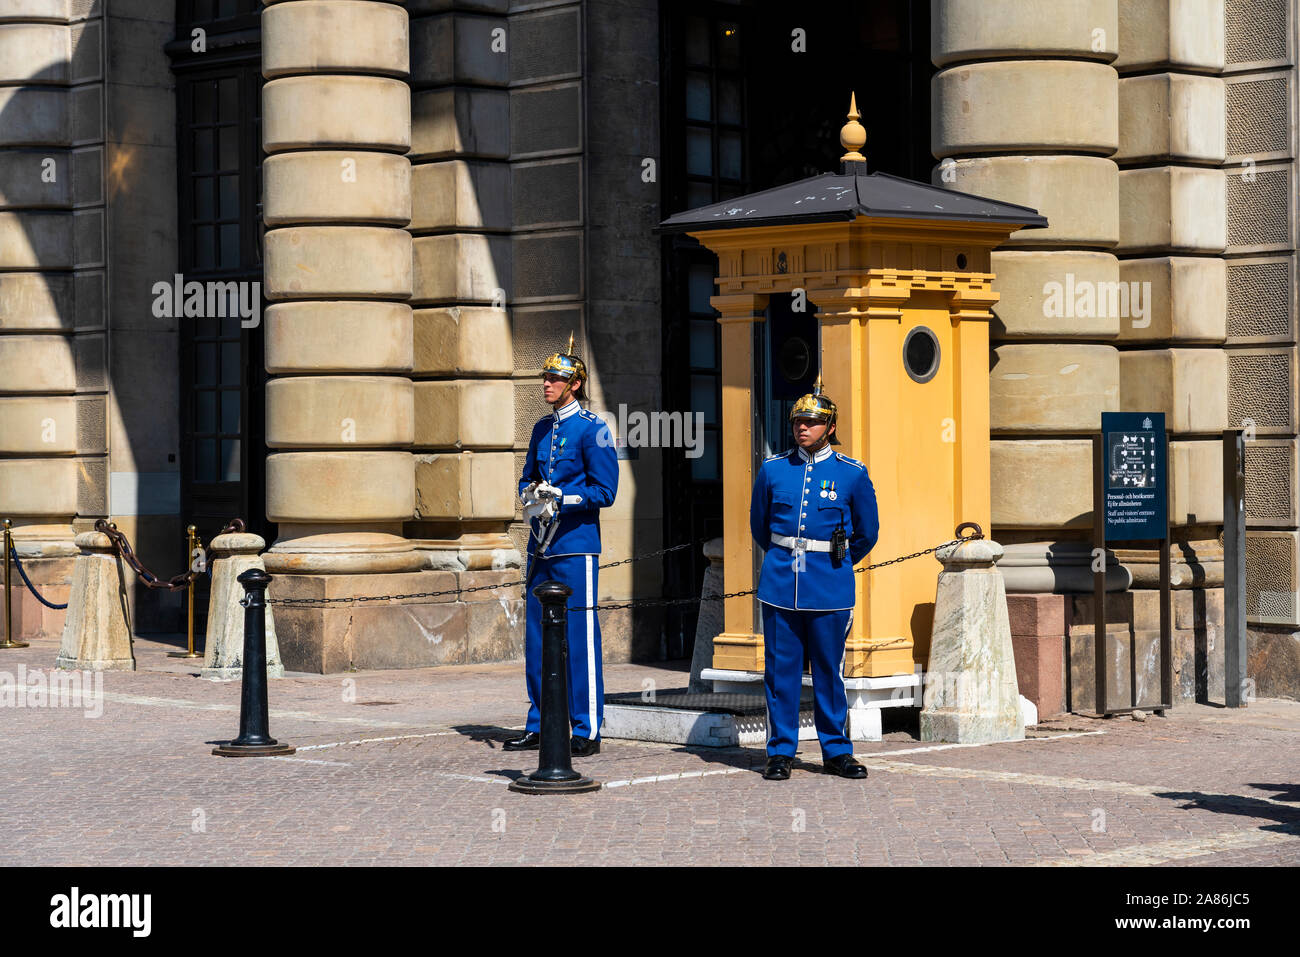 Changing of the guard at the Royal Palace and Museum in Stockholm, Sweden. Stock Photo